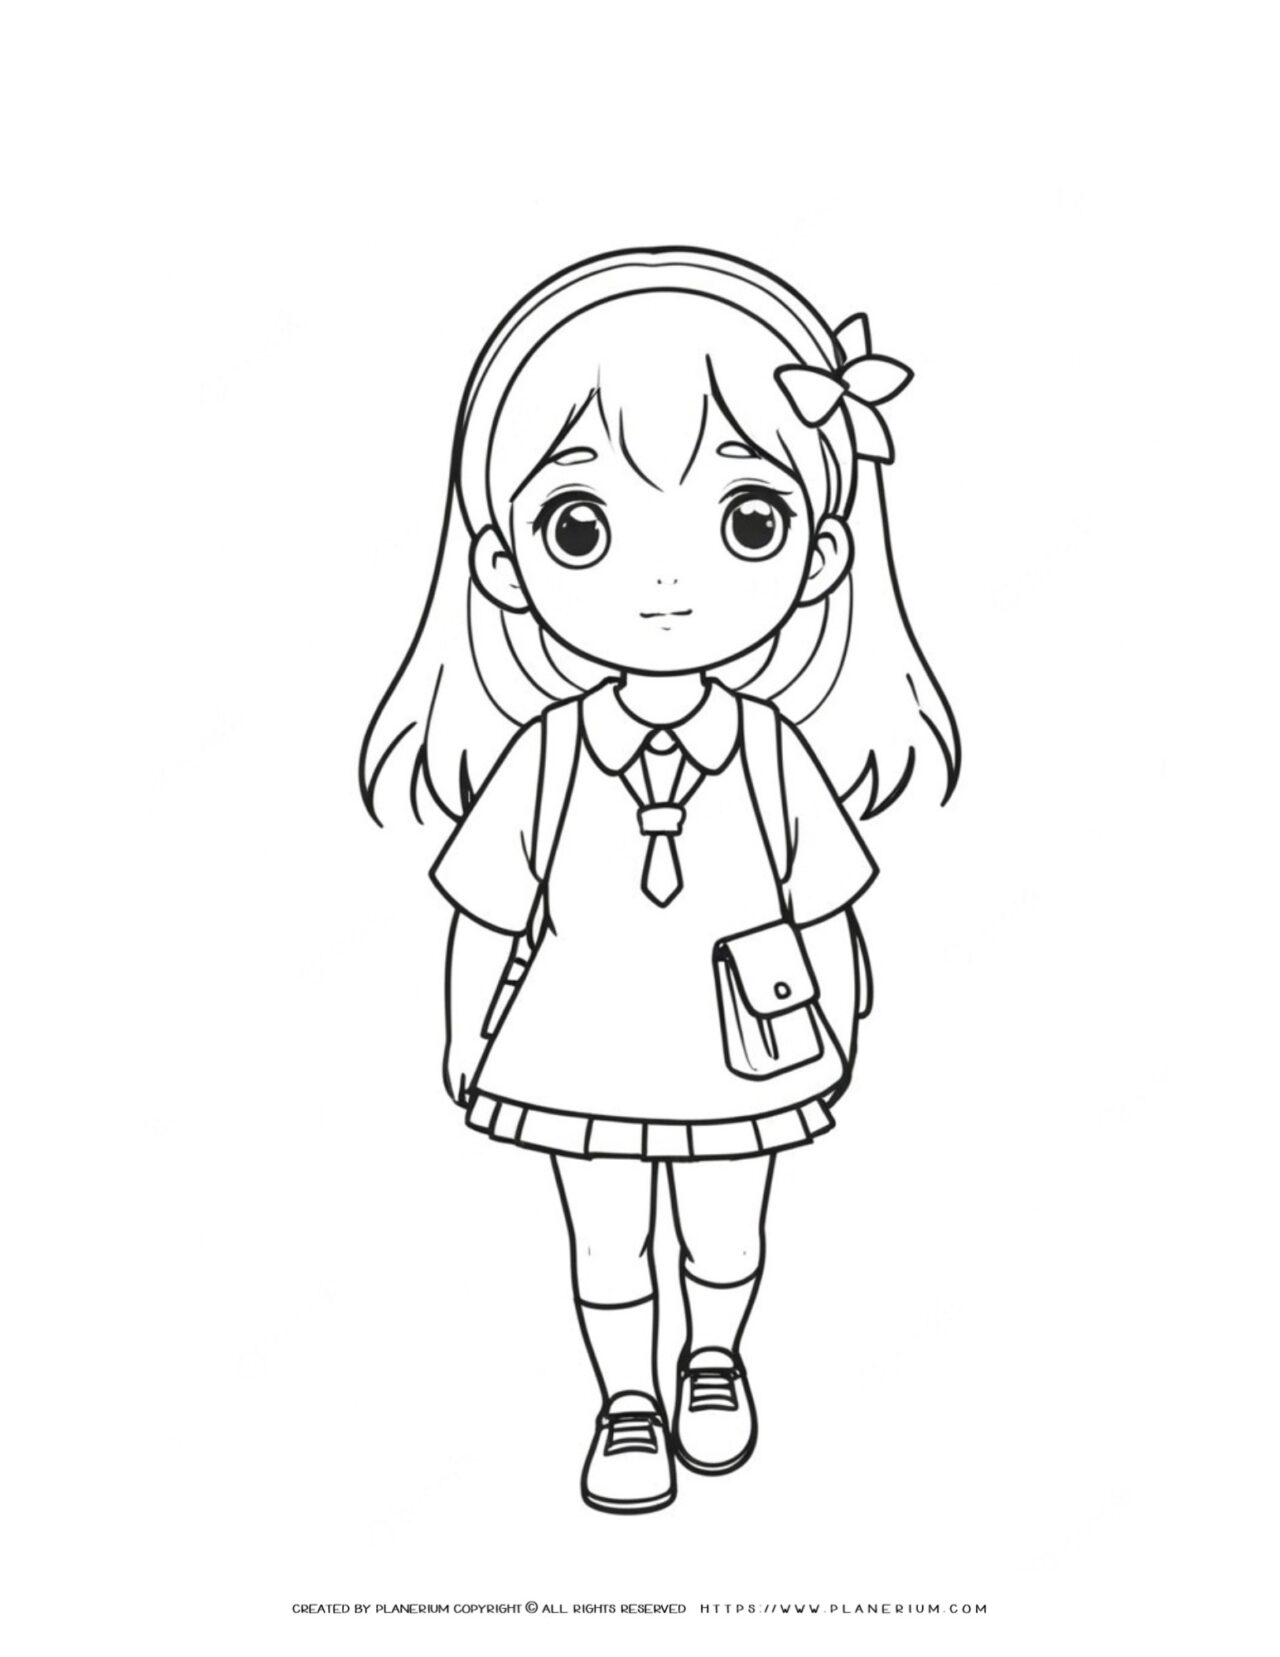 girl-going-to-school-with-a-uniform-anime-style-coloring-page-for-kids